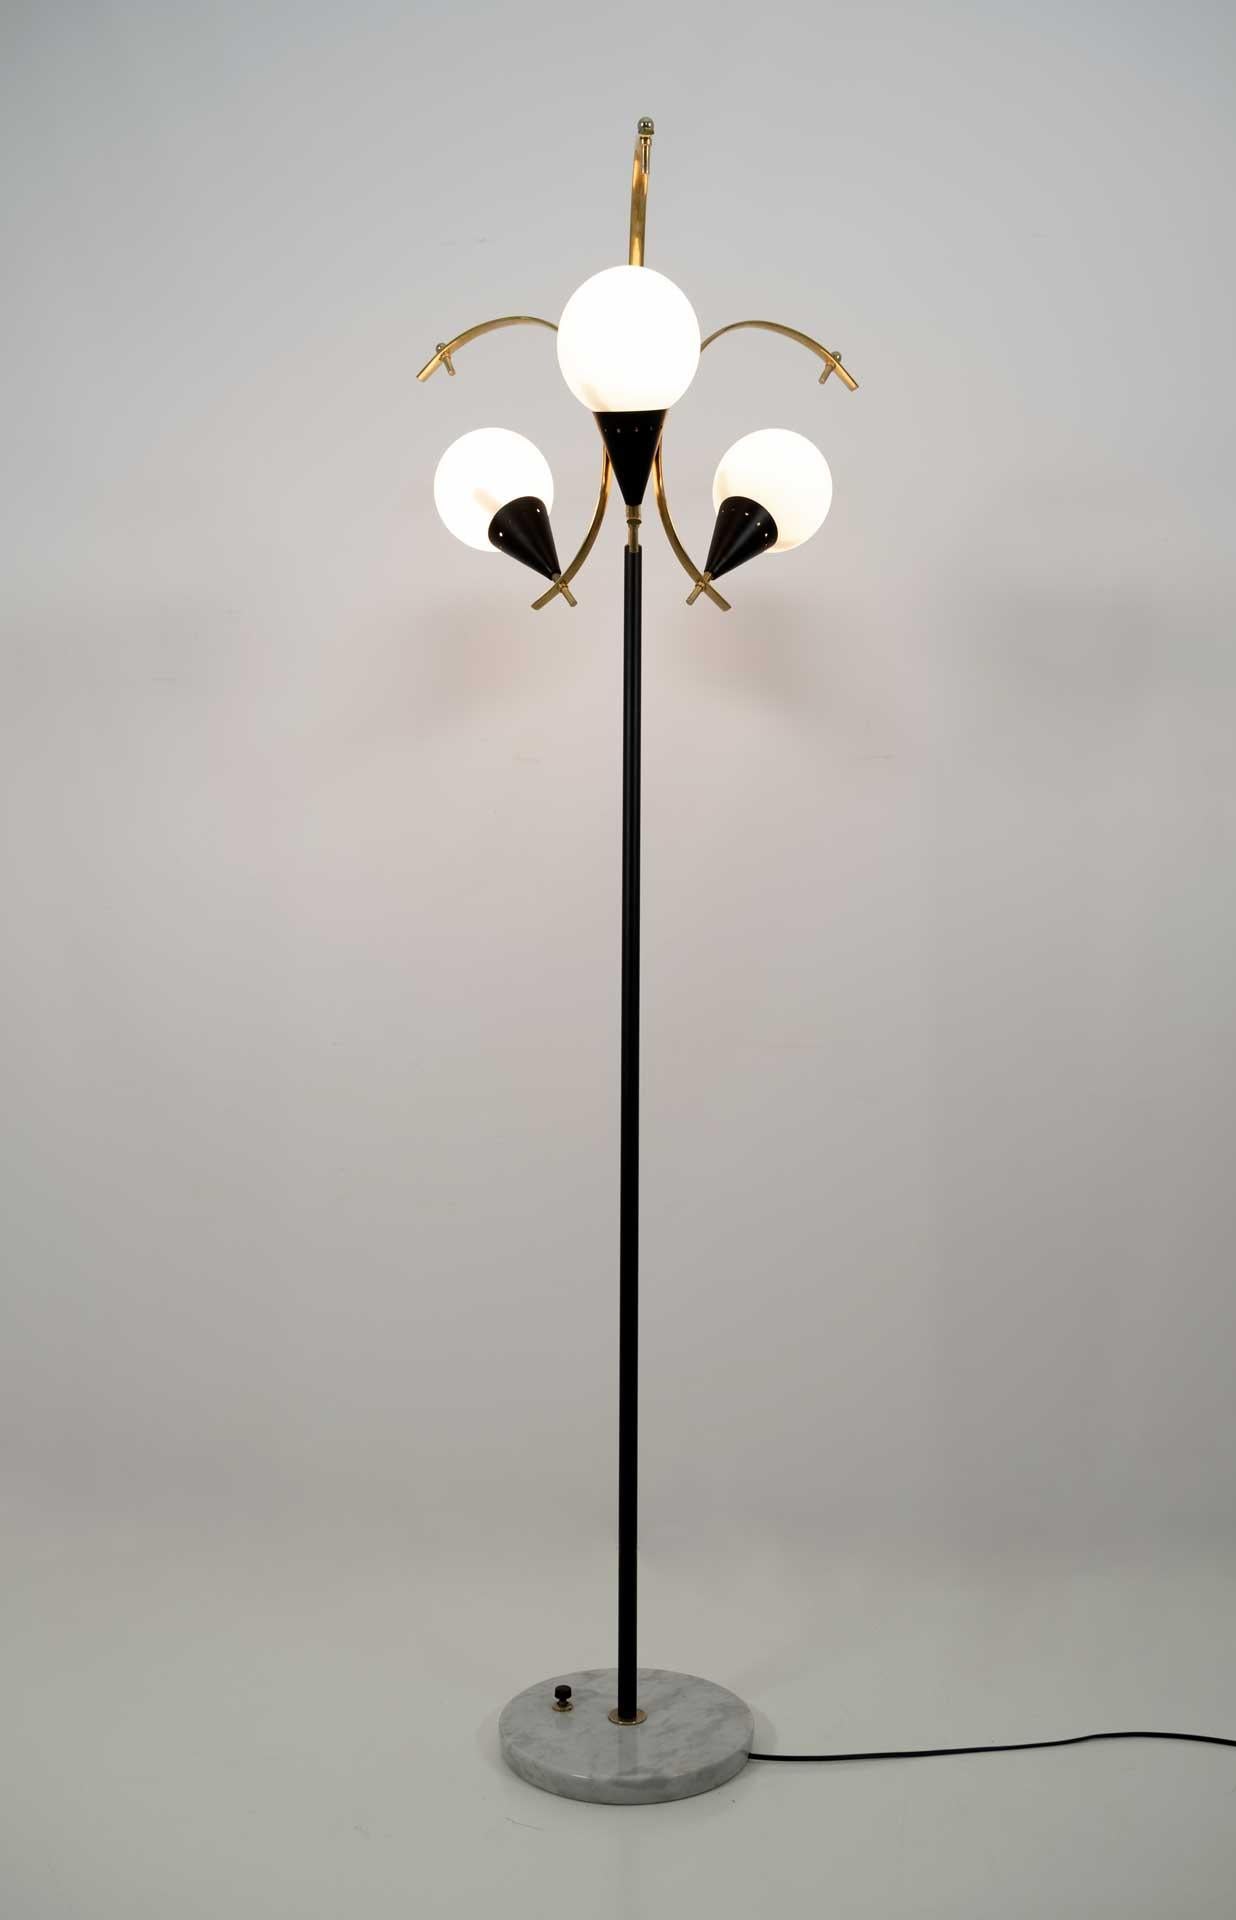 Floor lamp in polished brass, black lacquered metal, opal glass and marble base. Produced by Stilnovo in Italy in the 1950s.
The lamp has been completely restored and polished.